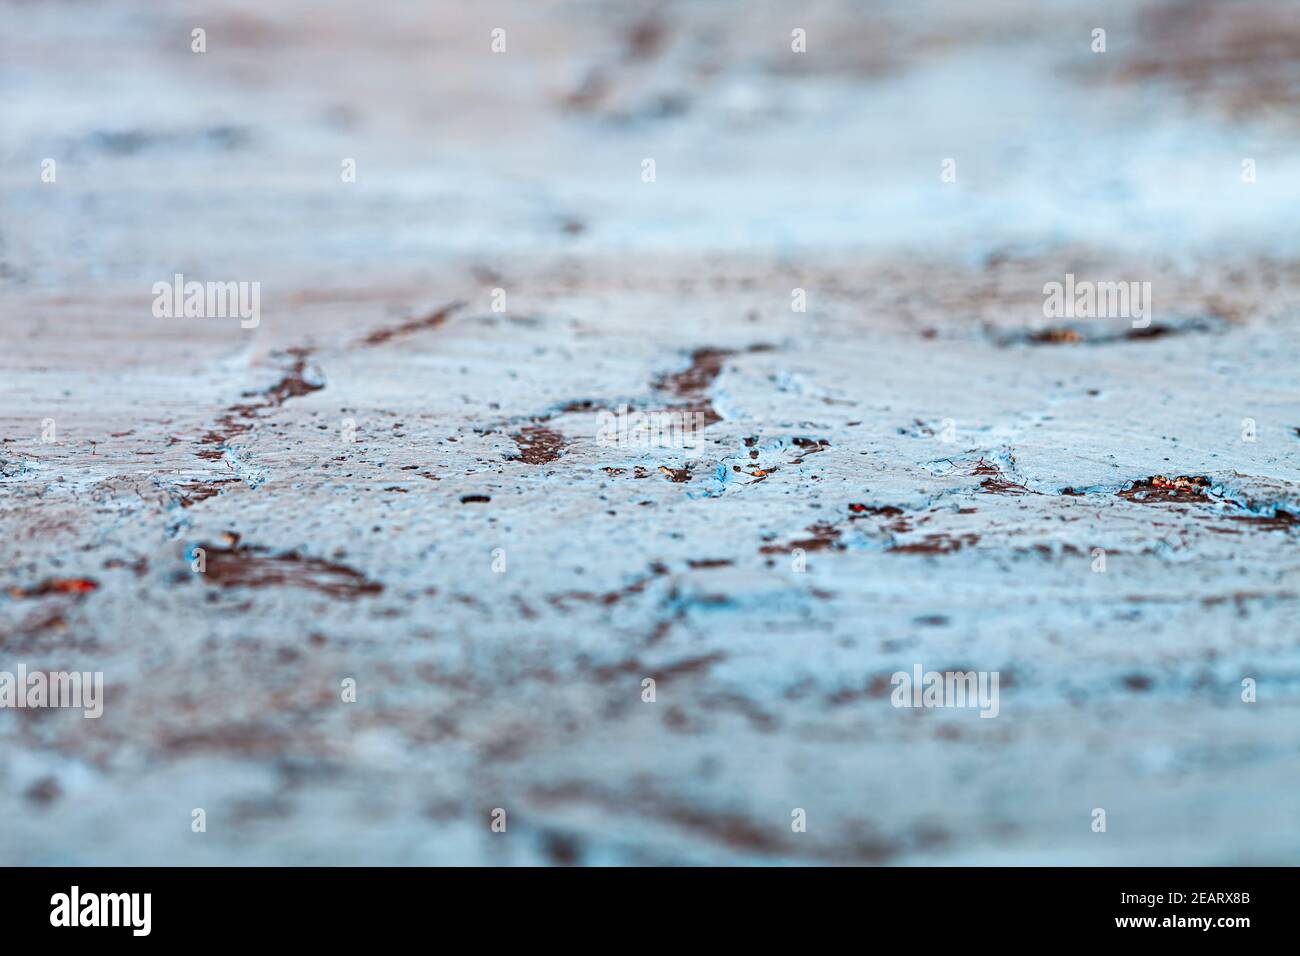 Texture of the concrete wall. Blue and black colors. Backgrounds Textures. Stock Photo